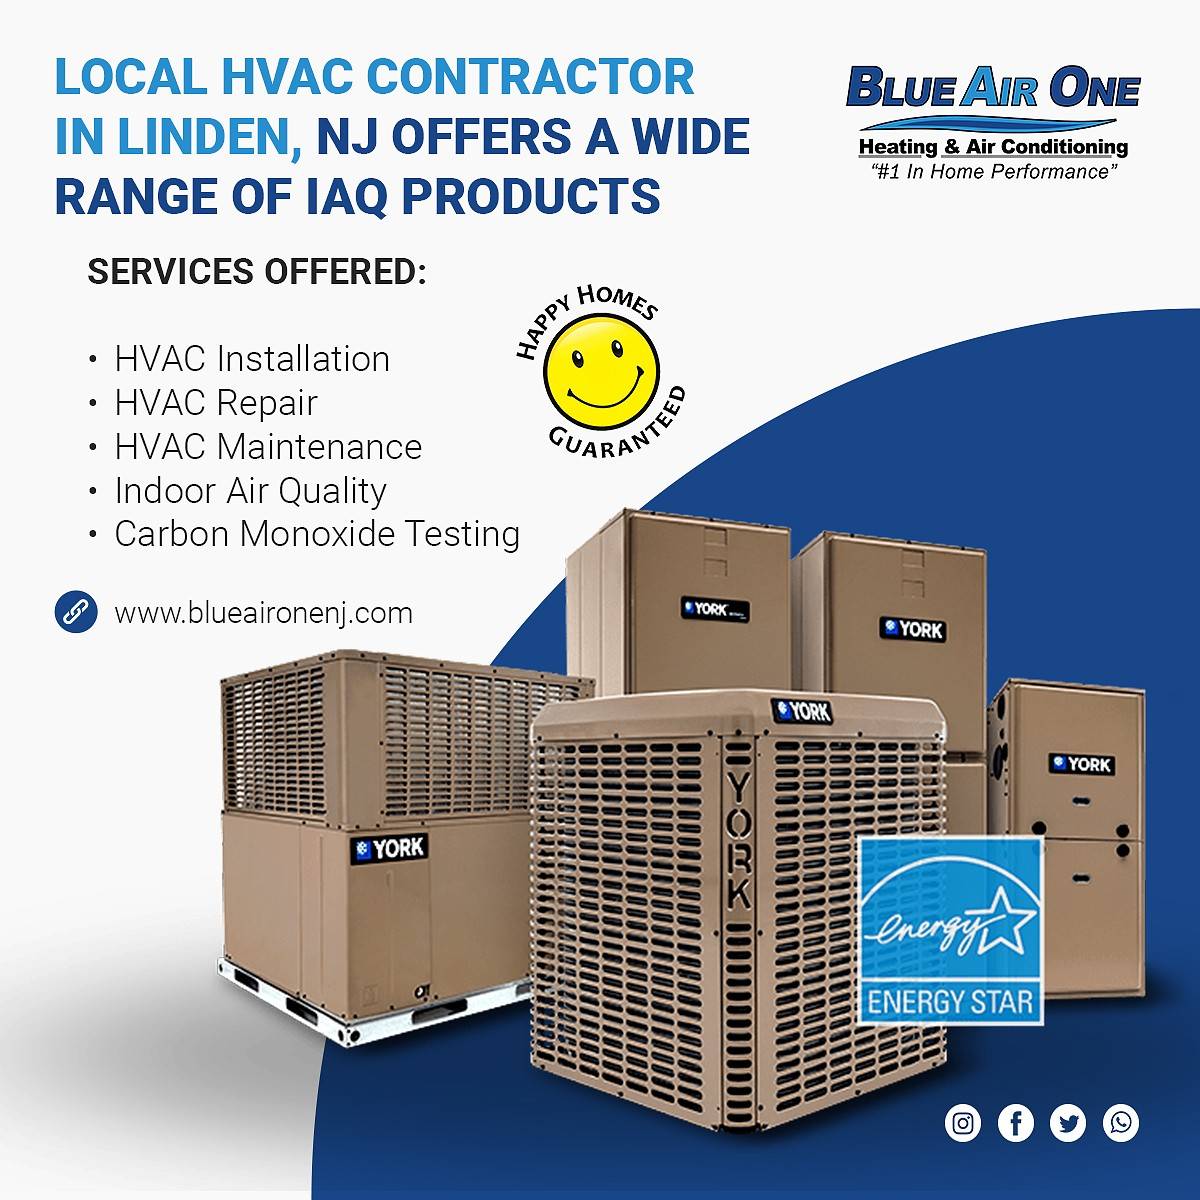 Local HVAC Contractor in Linden, NJ Offers a Wide Range of IAQ Products